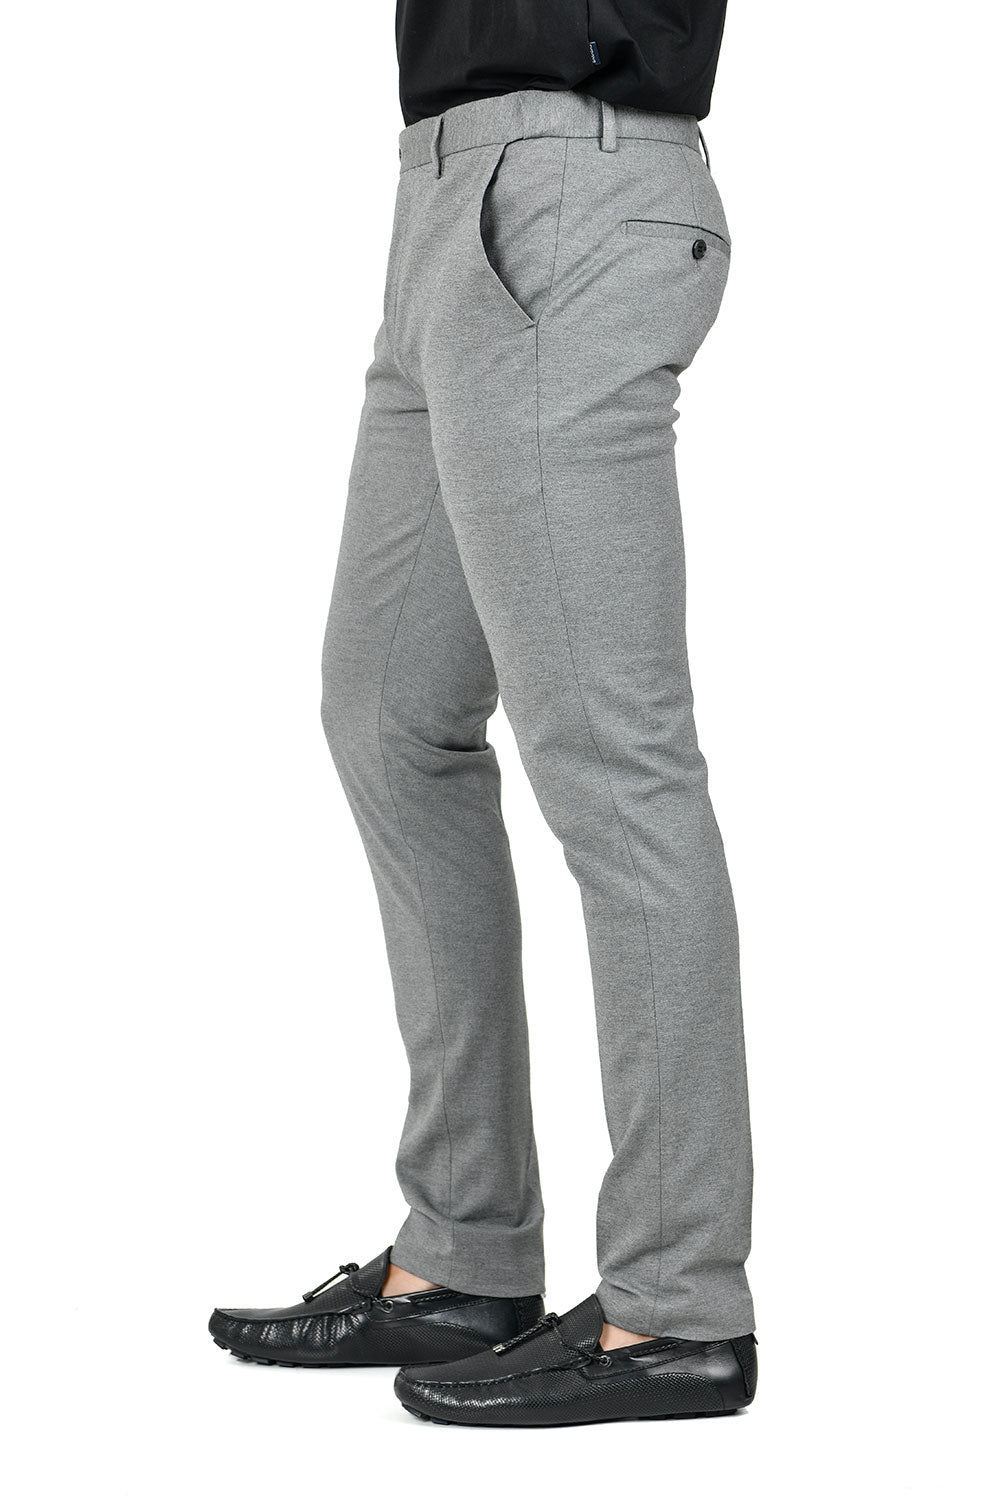 Barabas Men's Solid Color Basic Essential Chino Dress Pants CP4007 Grey